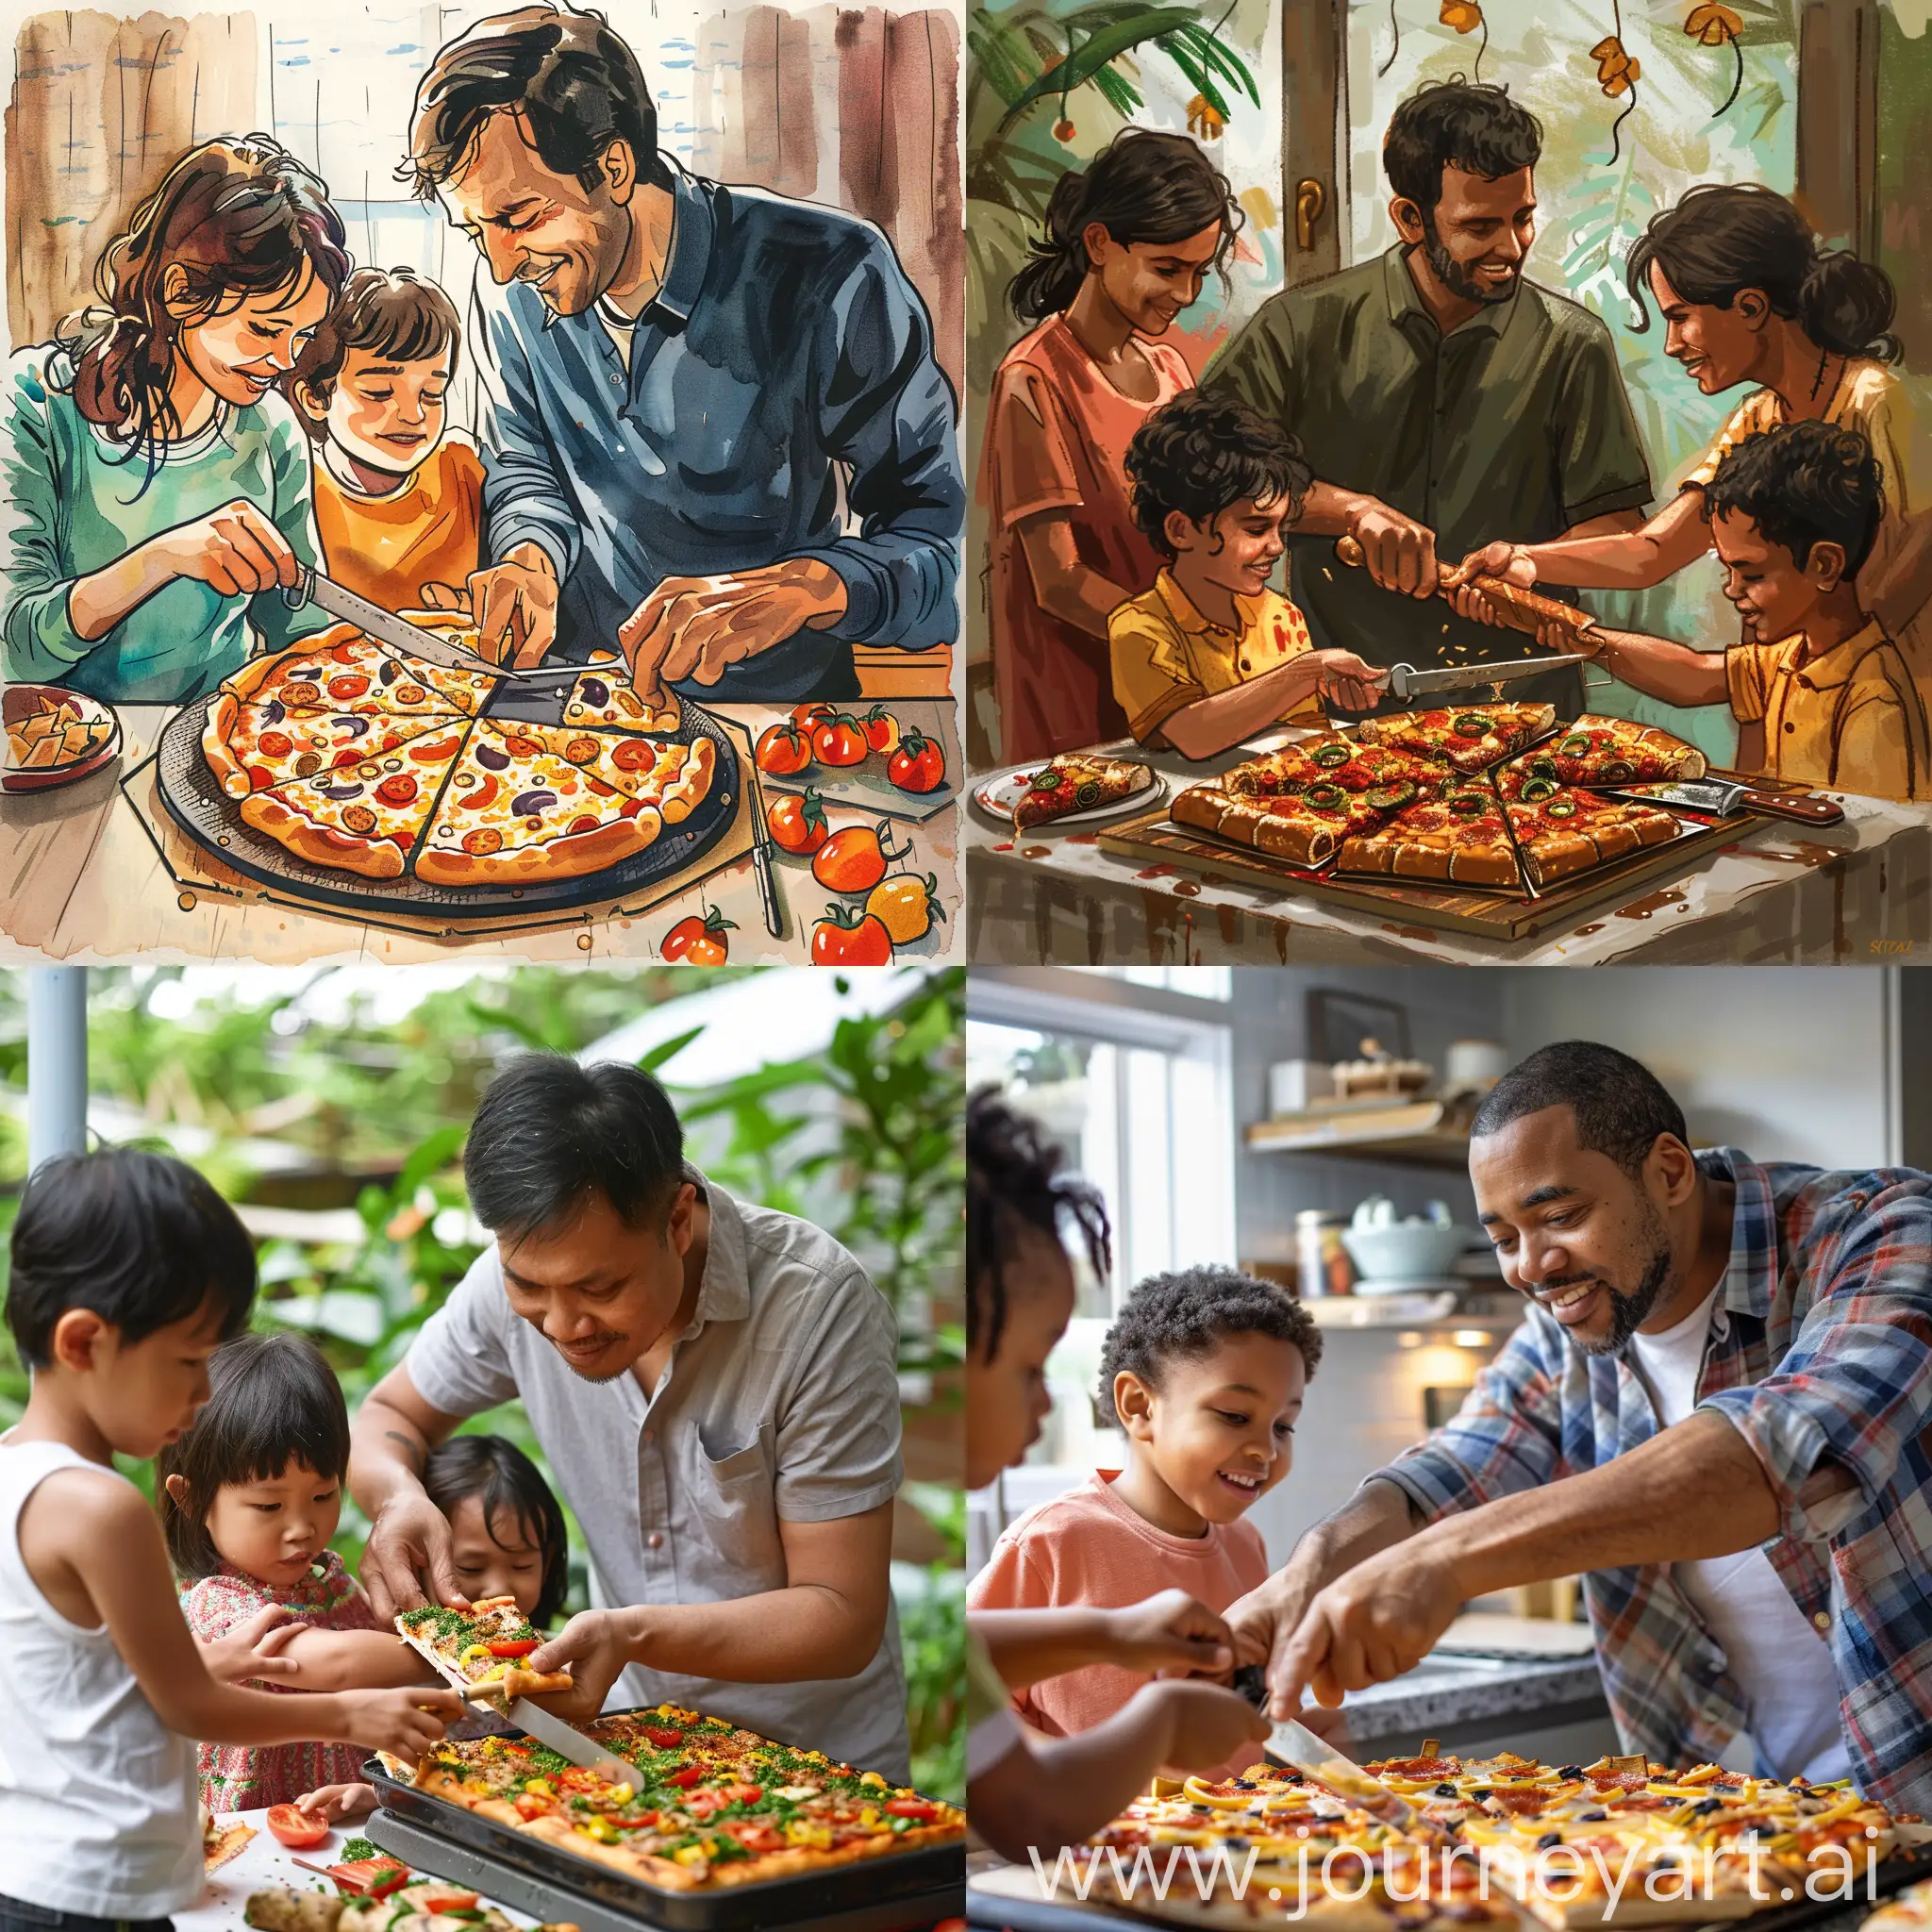 A family celebrating the father by sharing a cake made from kebab pizza. Father is cutting the cake using a pocket knife.